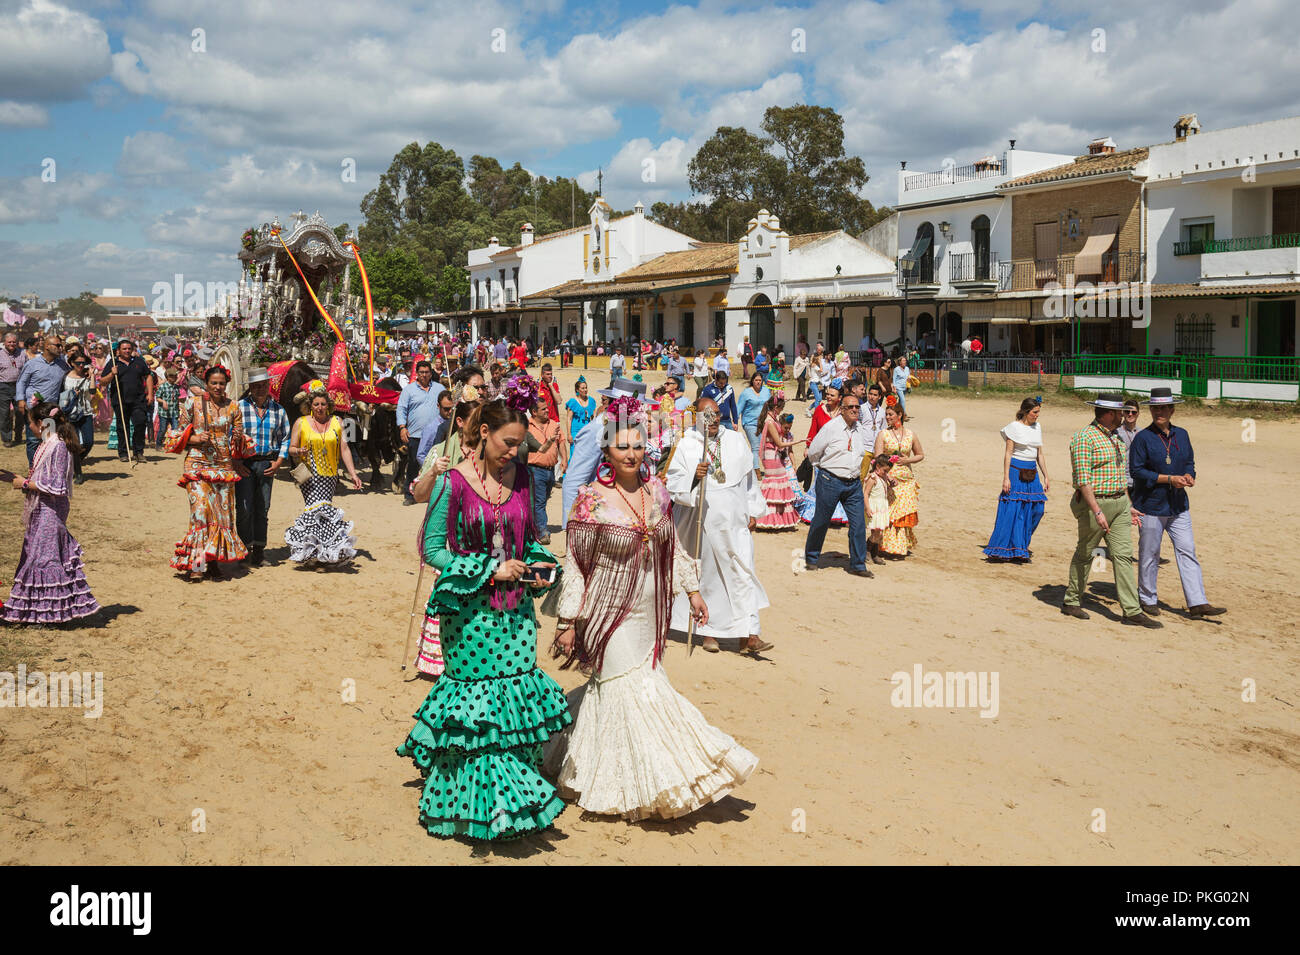 People in traditional clothes and decorated oxcarts, Pentecost pilgrimage of El Rocio, Huelva province, Andalusia, Spain Stock Photo